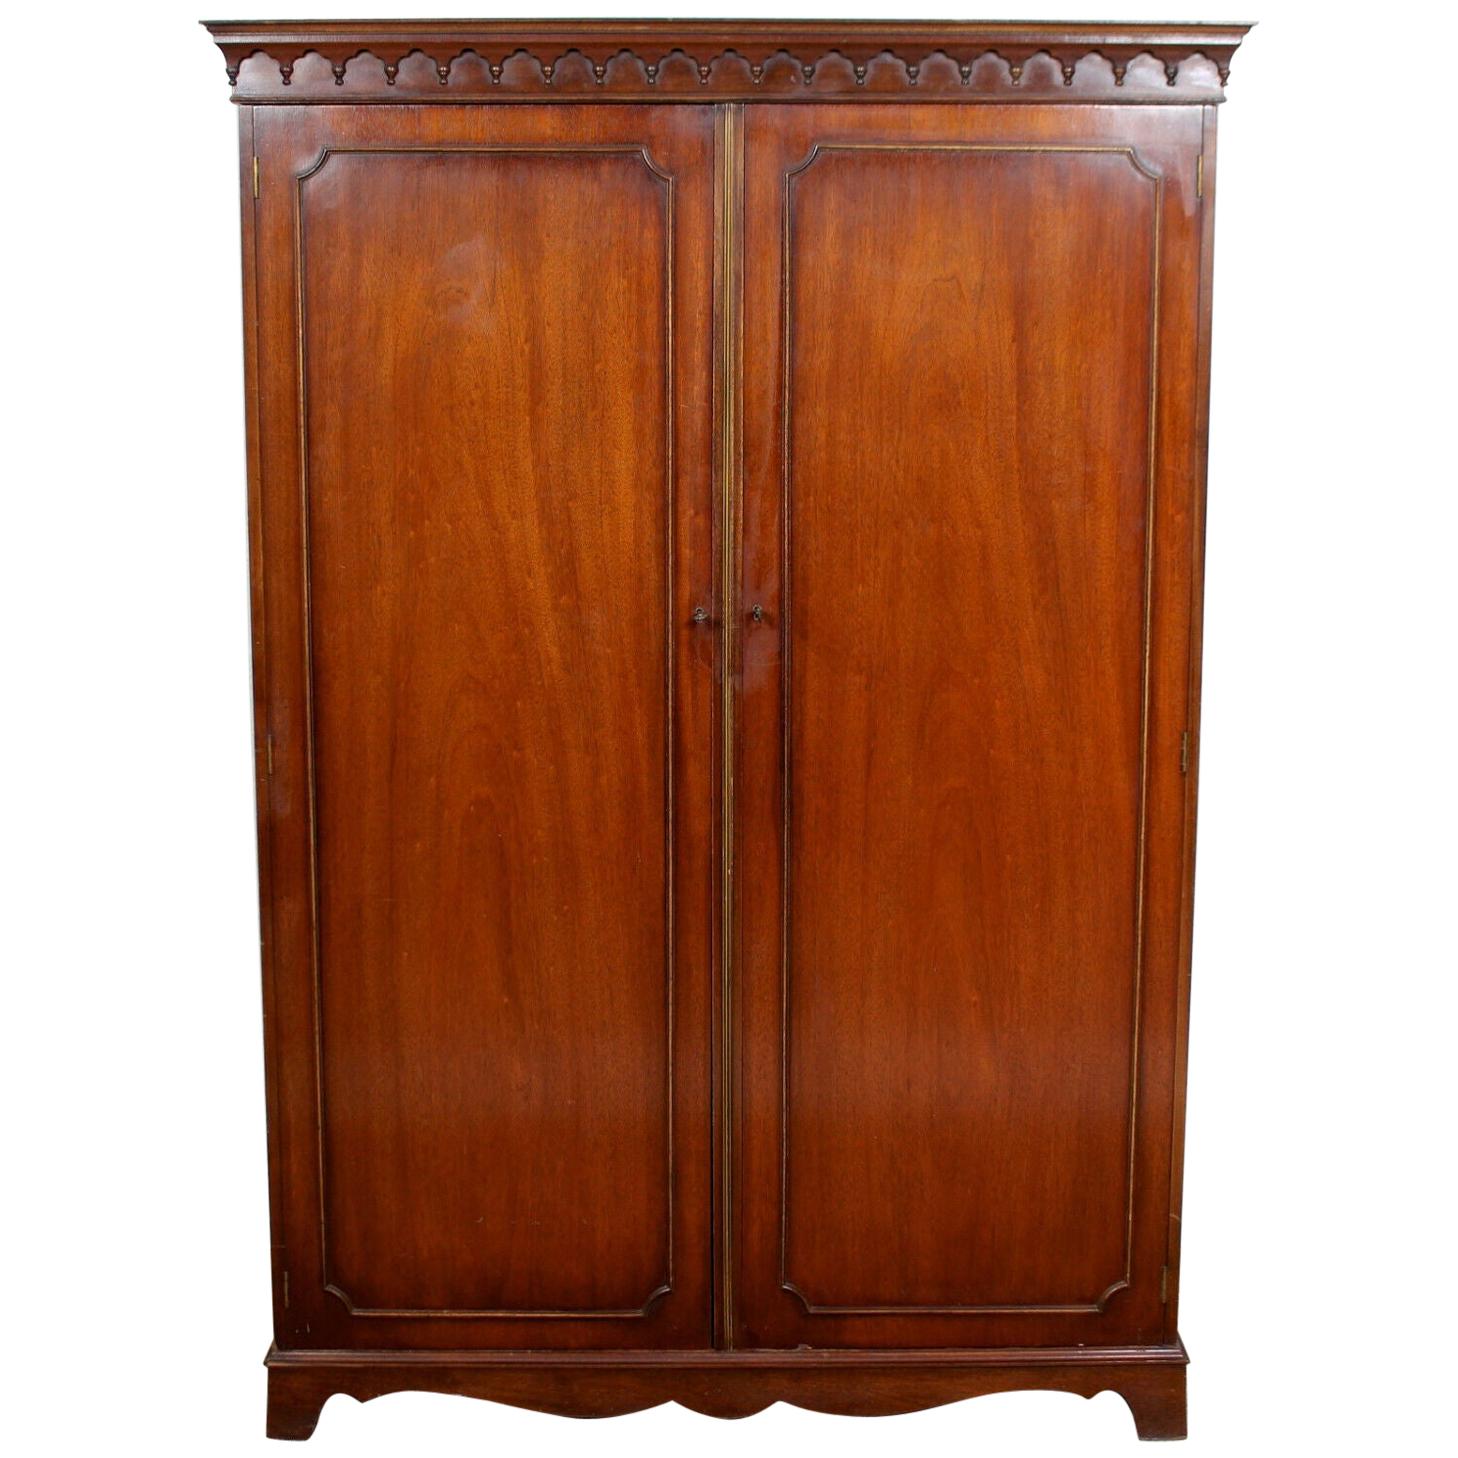 English Mahogany Wardrobe Bevan Funnell Antique Vintage Double Armoire For Sale